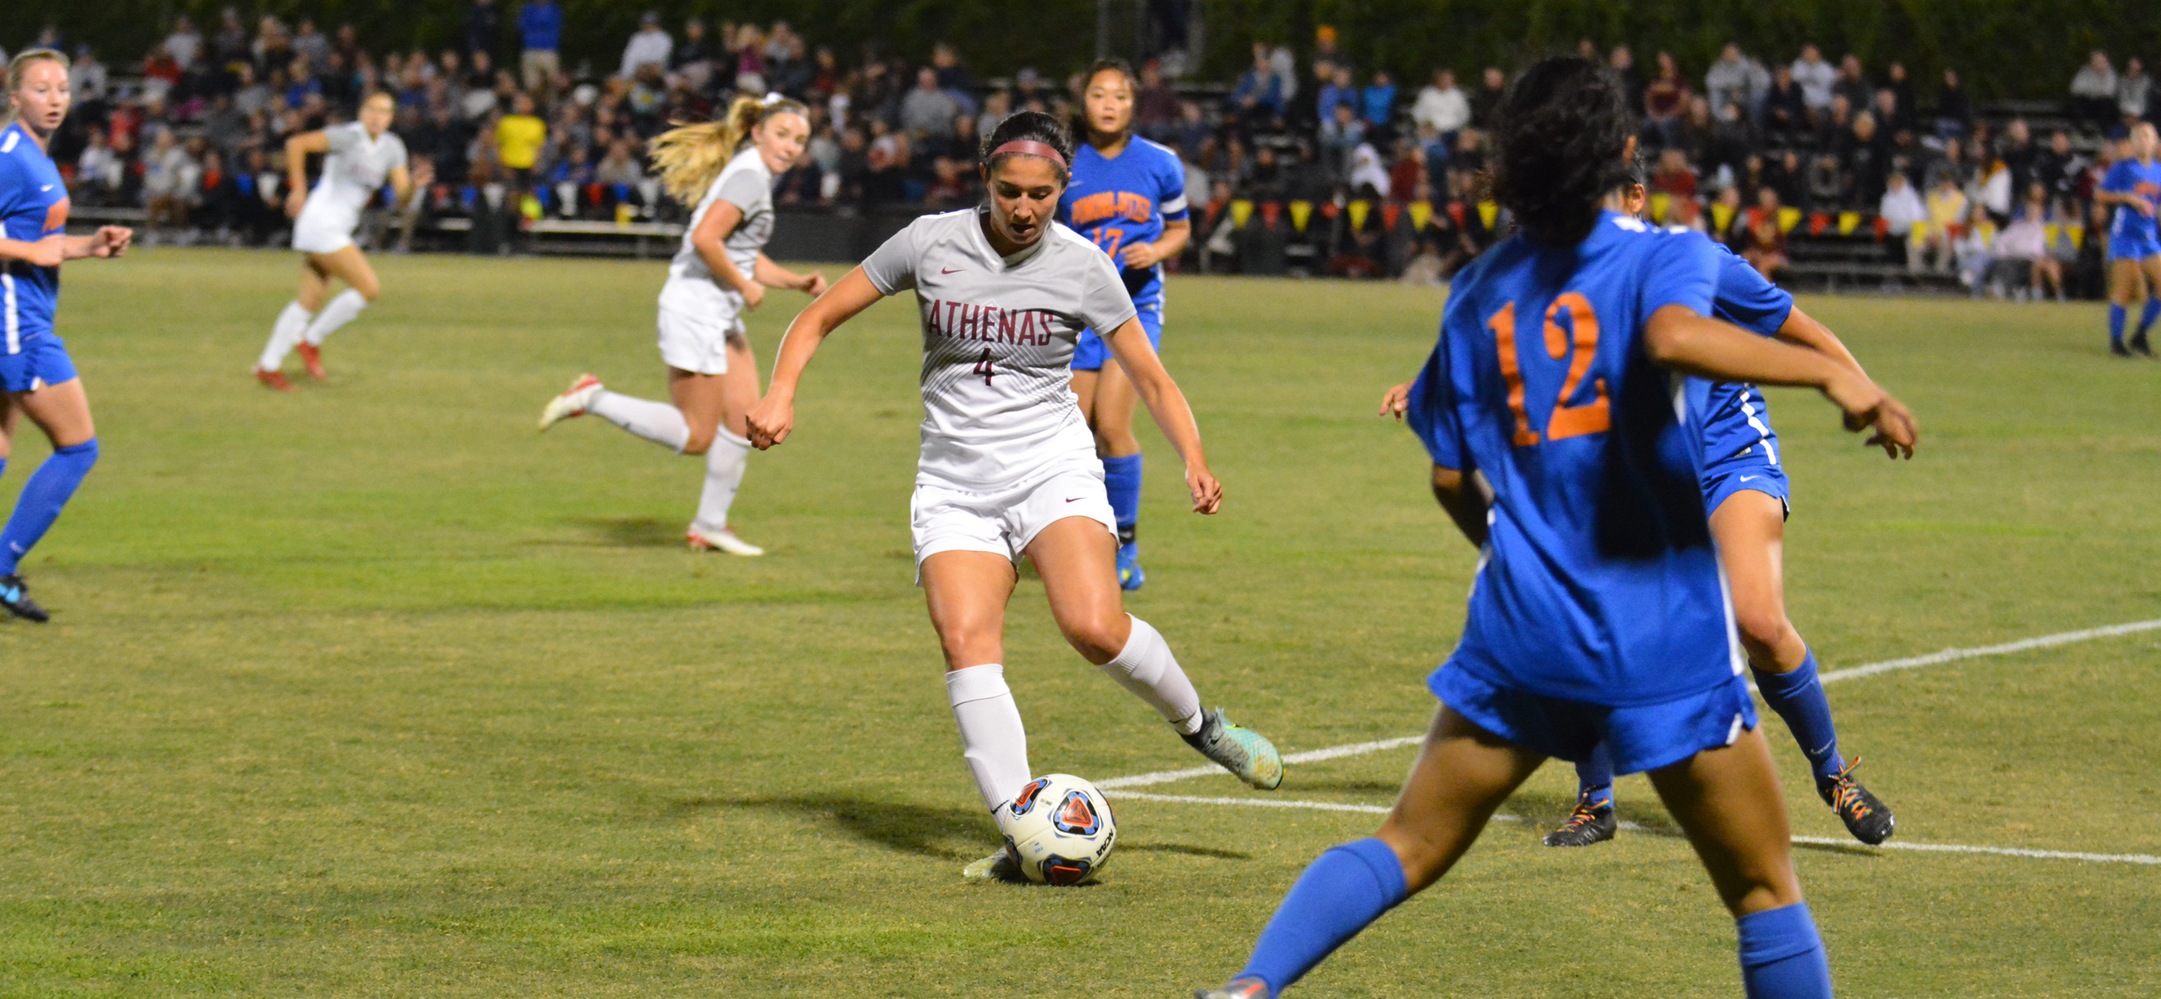 Sarah Tocher battles for the ball in offensive third against Pomona-Pitzer (photo by Tessa Guerra)